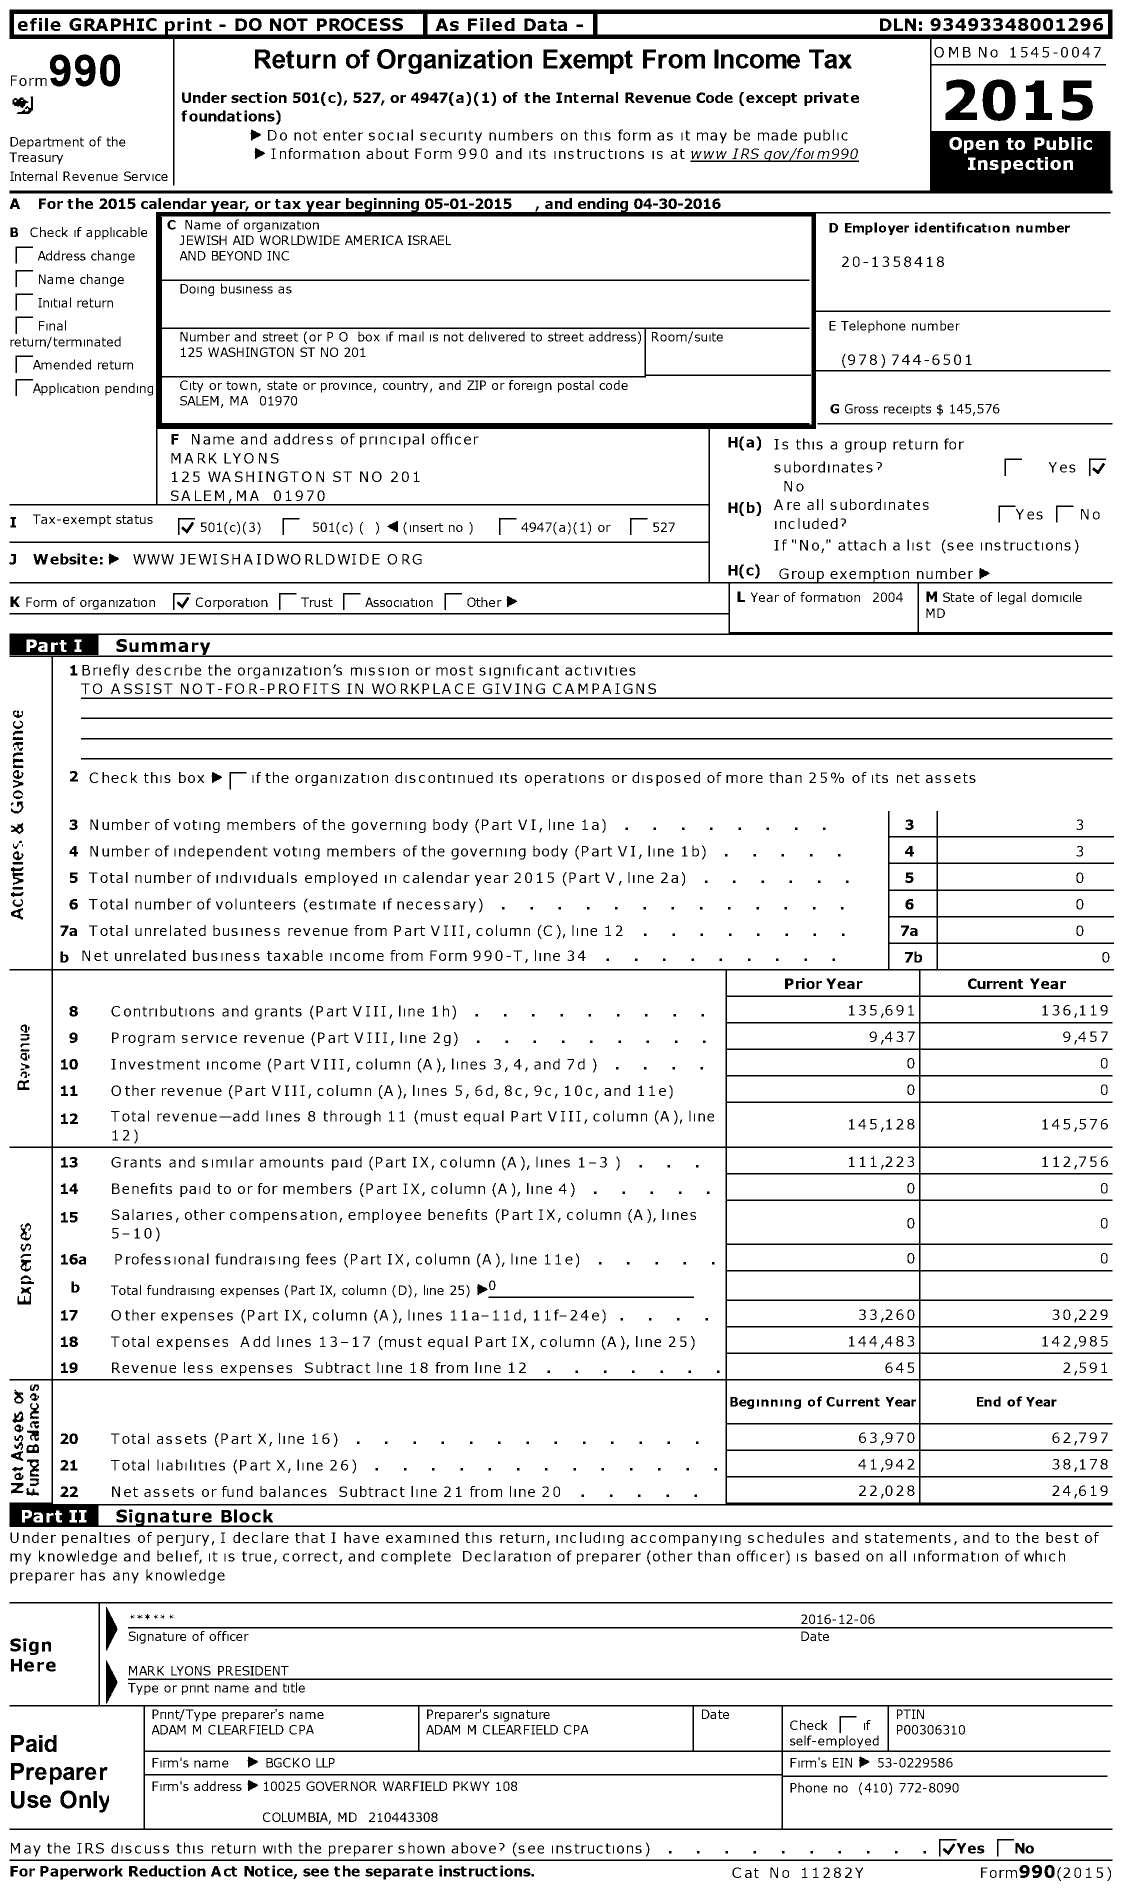 Image of first page of 2015 Form 990 for Jewish Aid Worldwide America Israel and Beyond